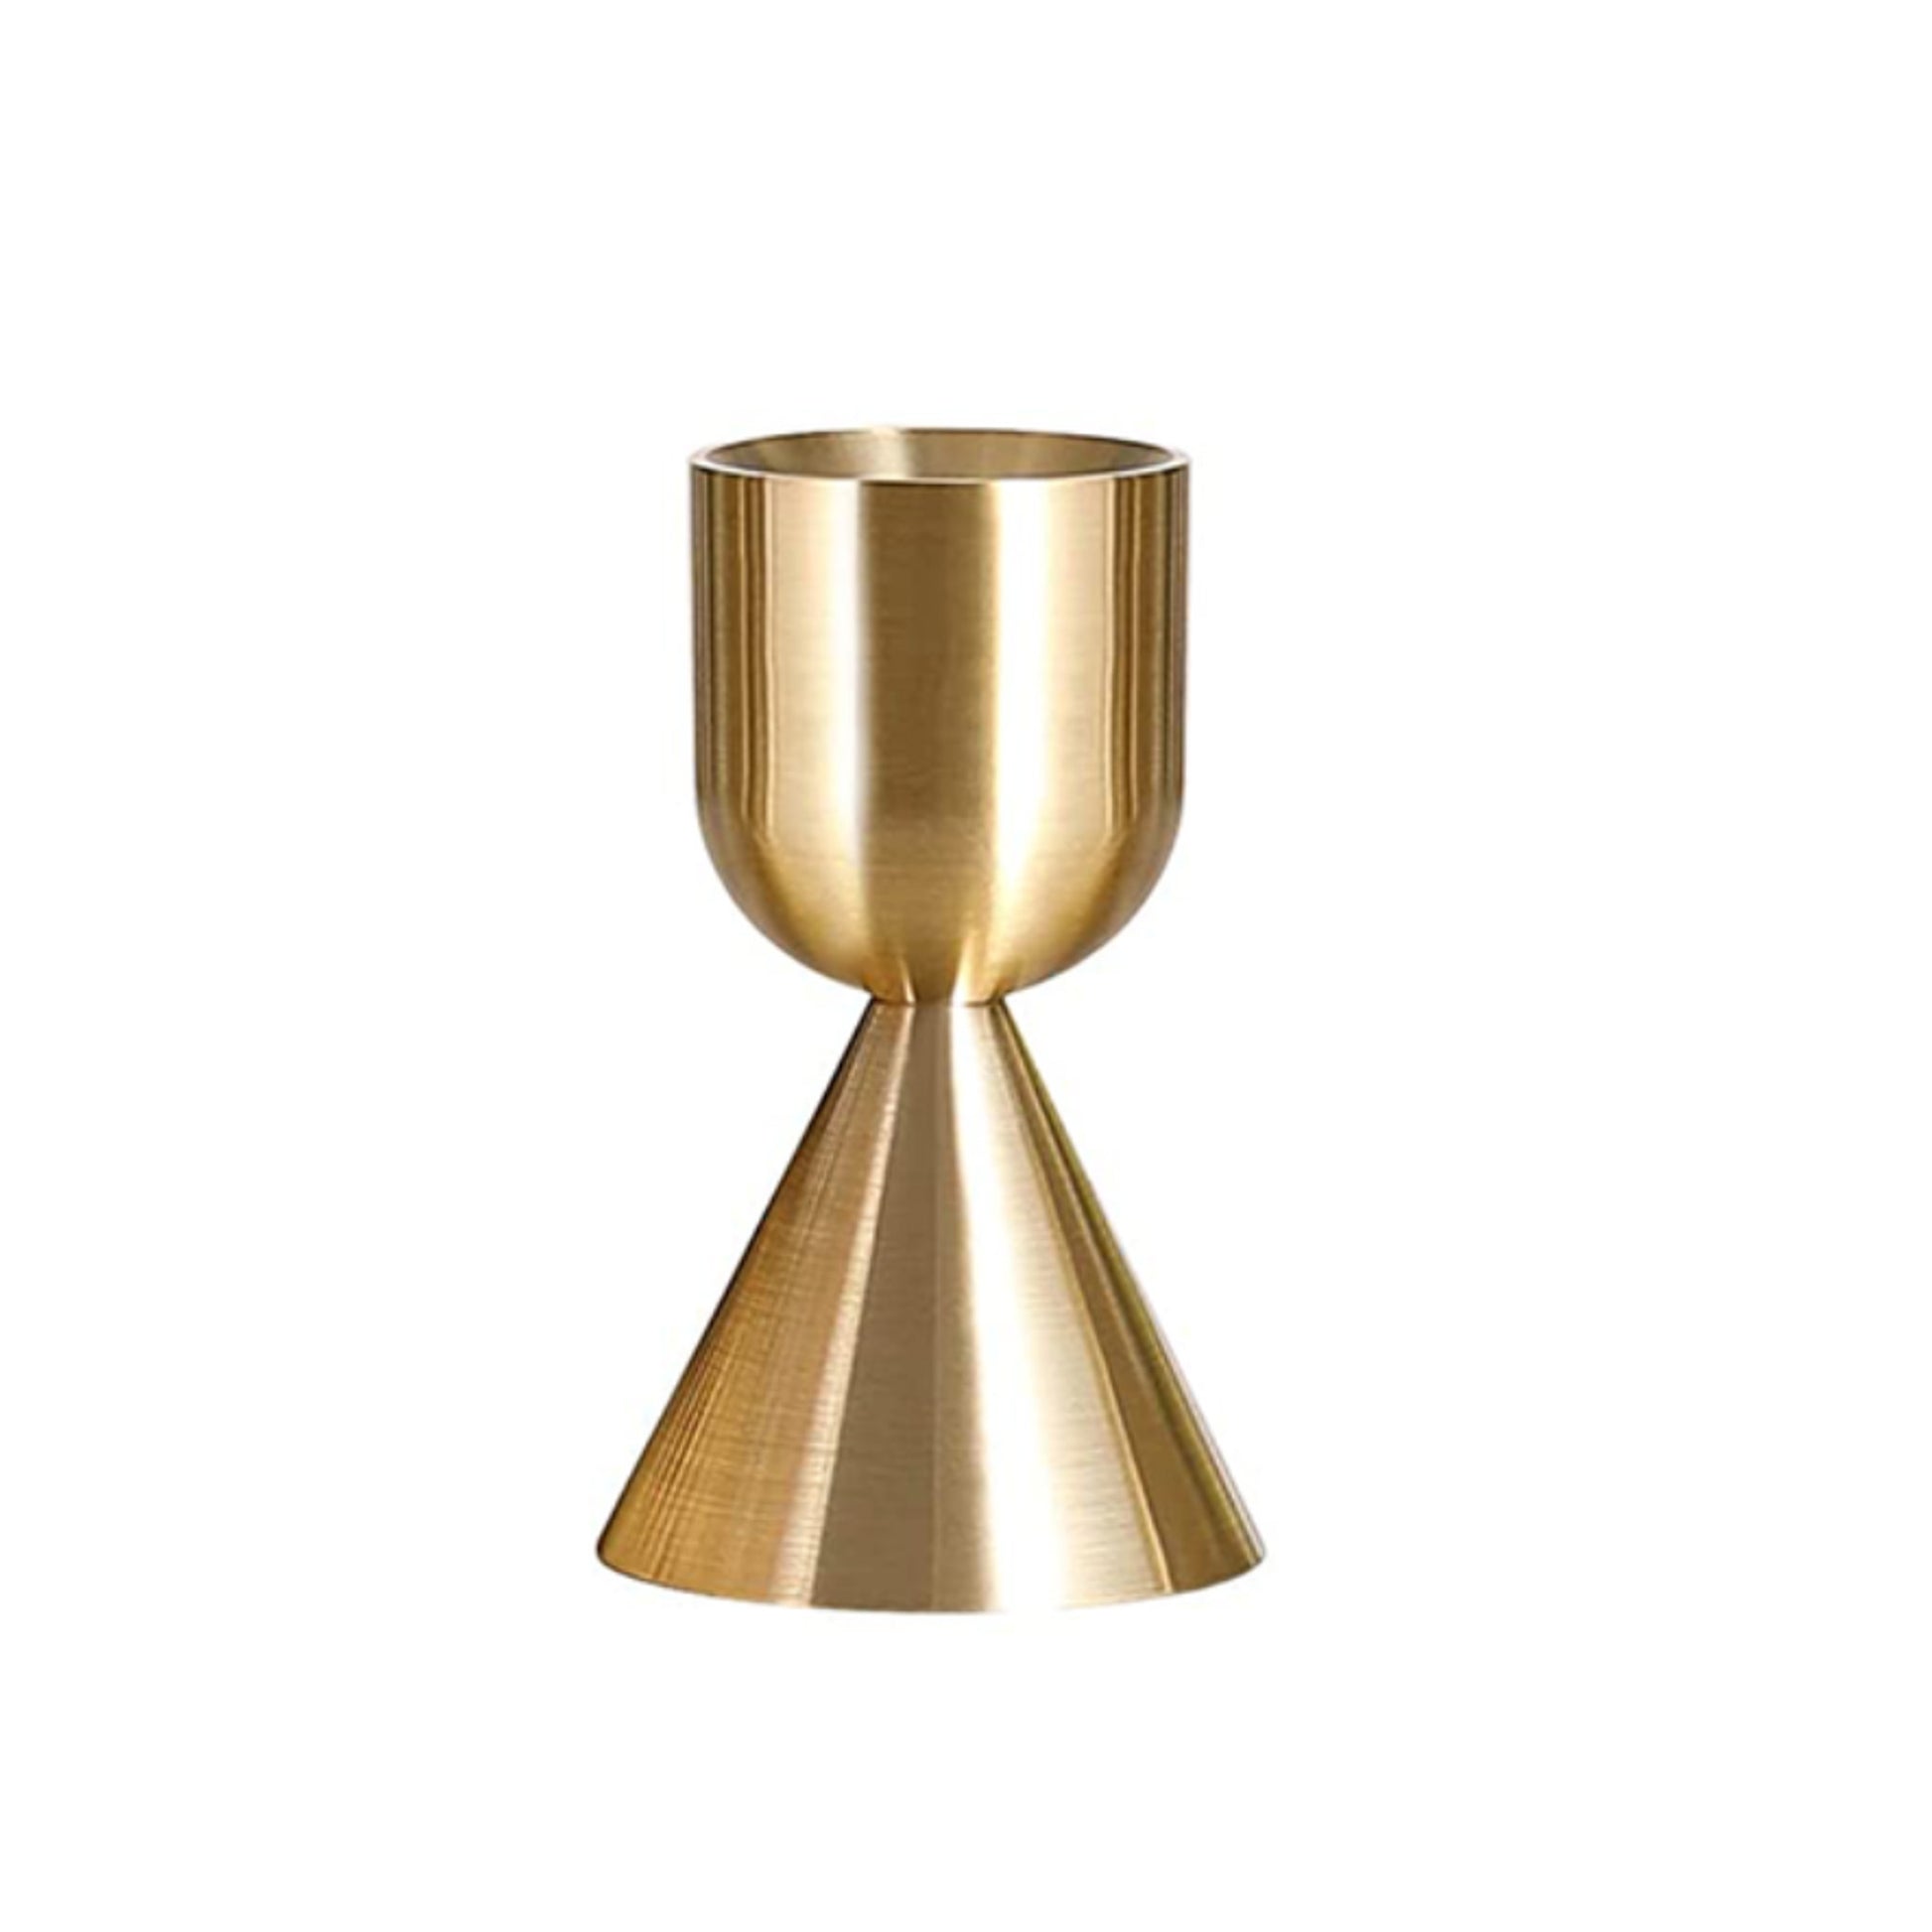 Set of 3 Brass Gold Metal Taper Candle Holders Candlestick Holders